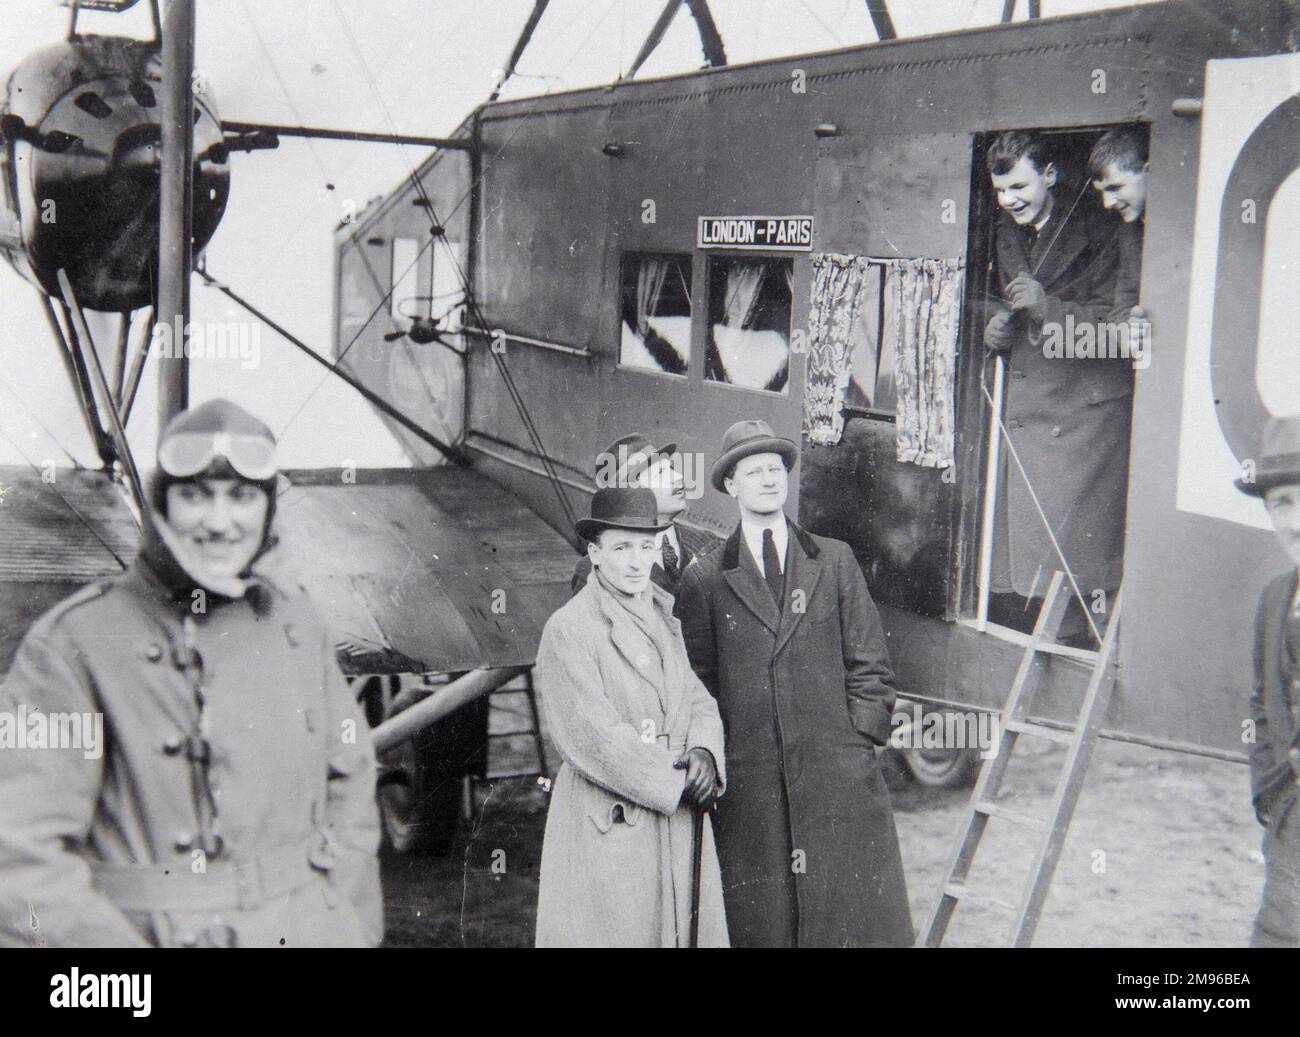 A group of passengers with an aircraft taking them on a London to Paris flight, in the early days of aviation.  The pilot stands on the left, with his goggles up on his forehead. The aircraft is a Handley Page O/400, converted as an airliner to shuttle dignitaries between London and Paris for the Treaty of Versailles negotiations. Stock Photo